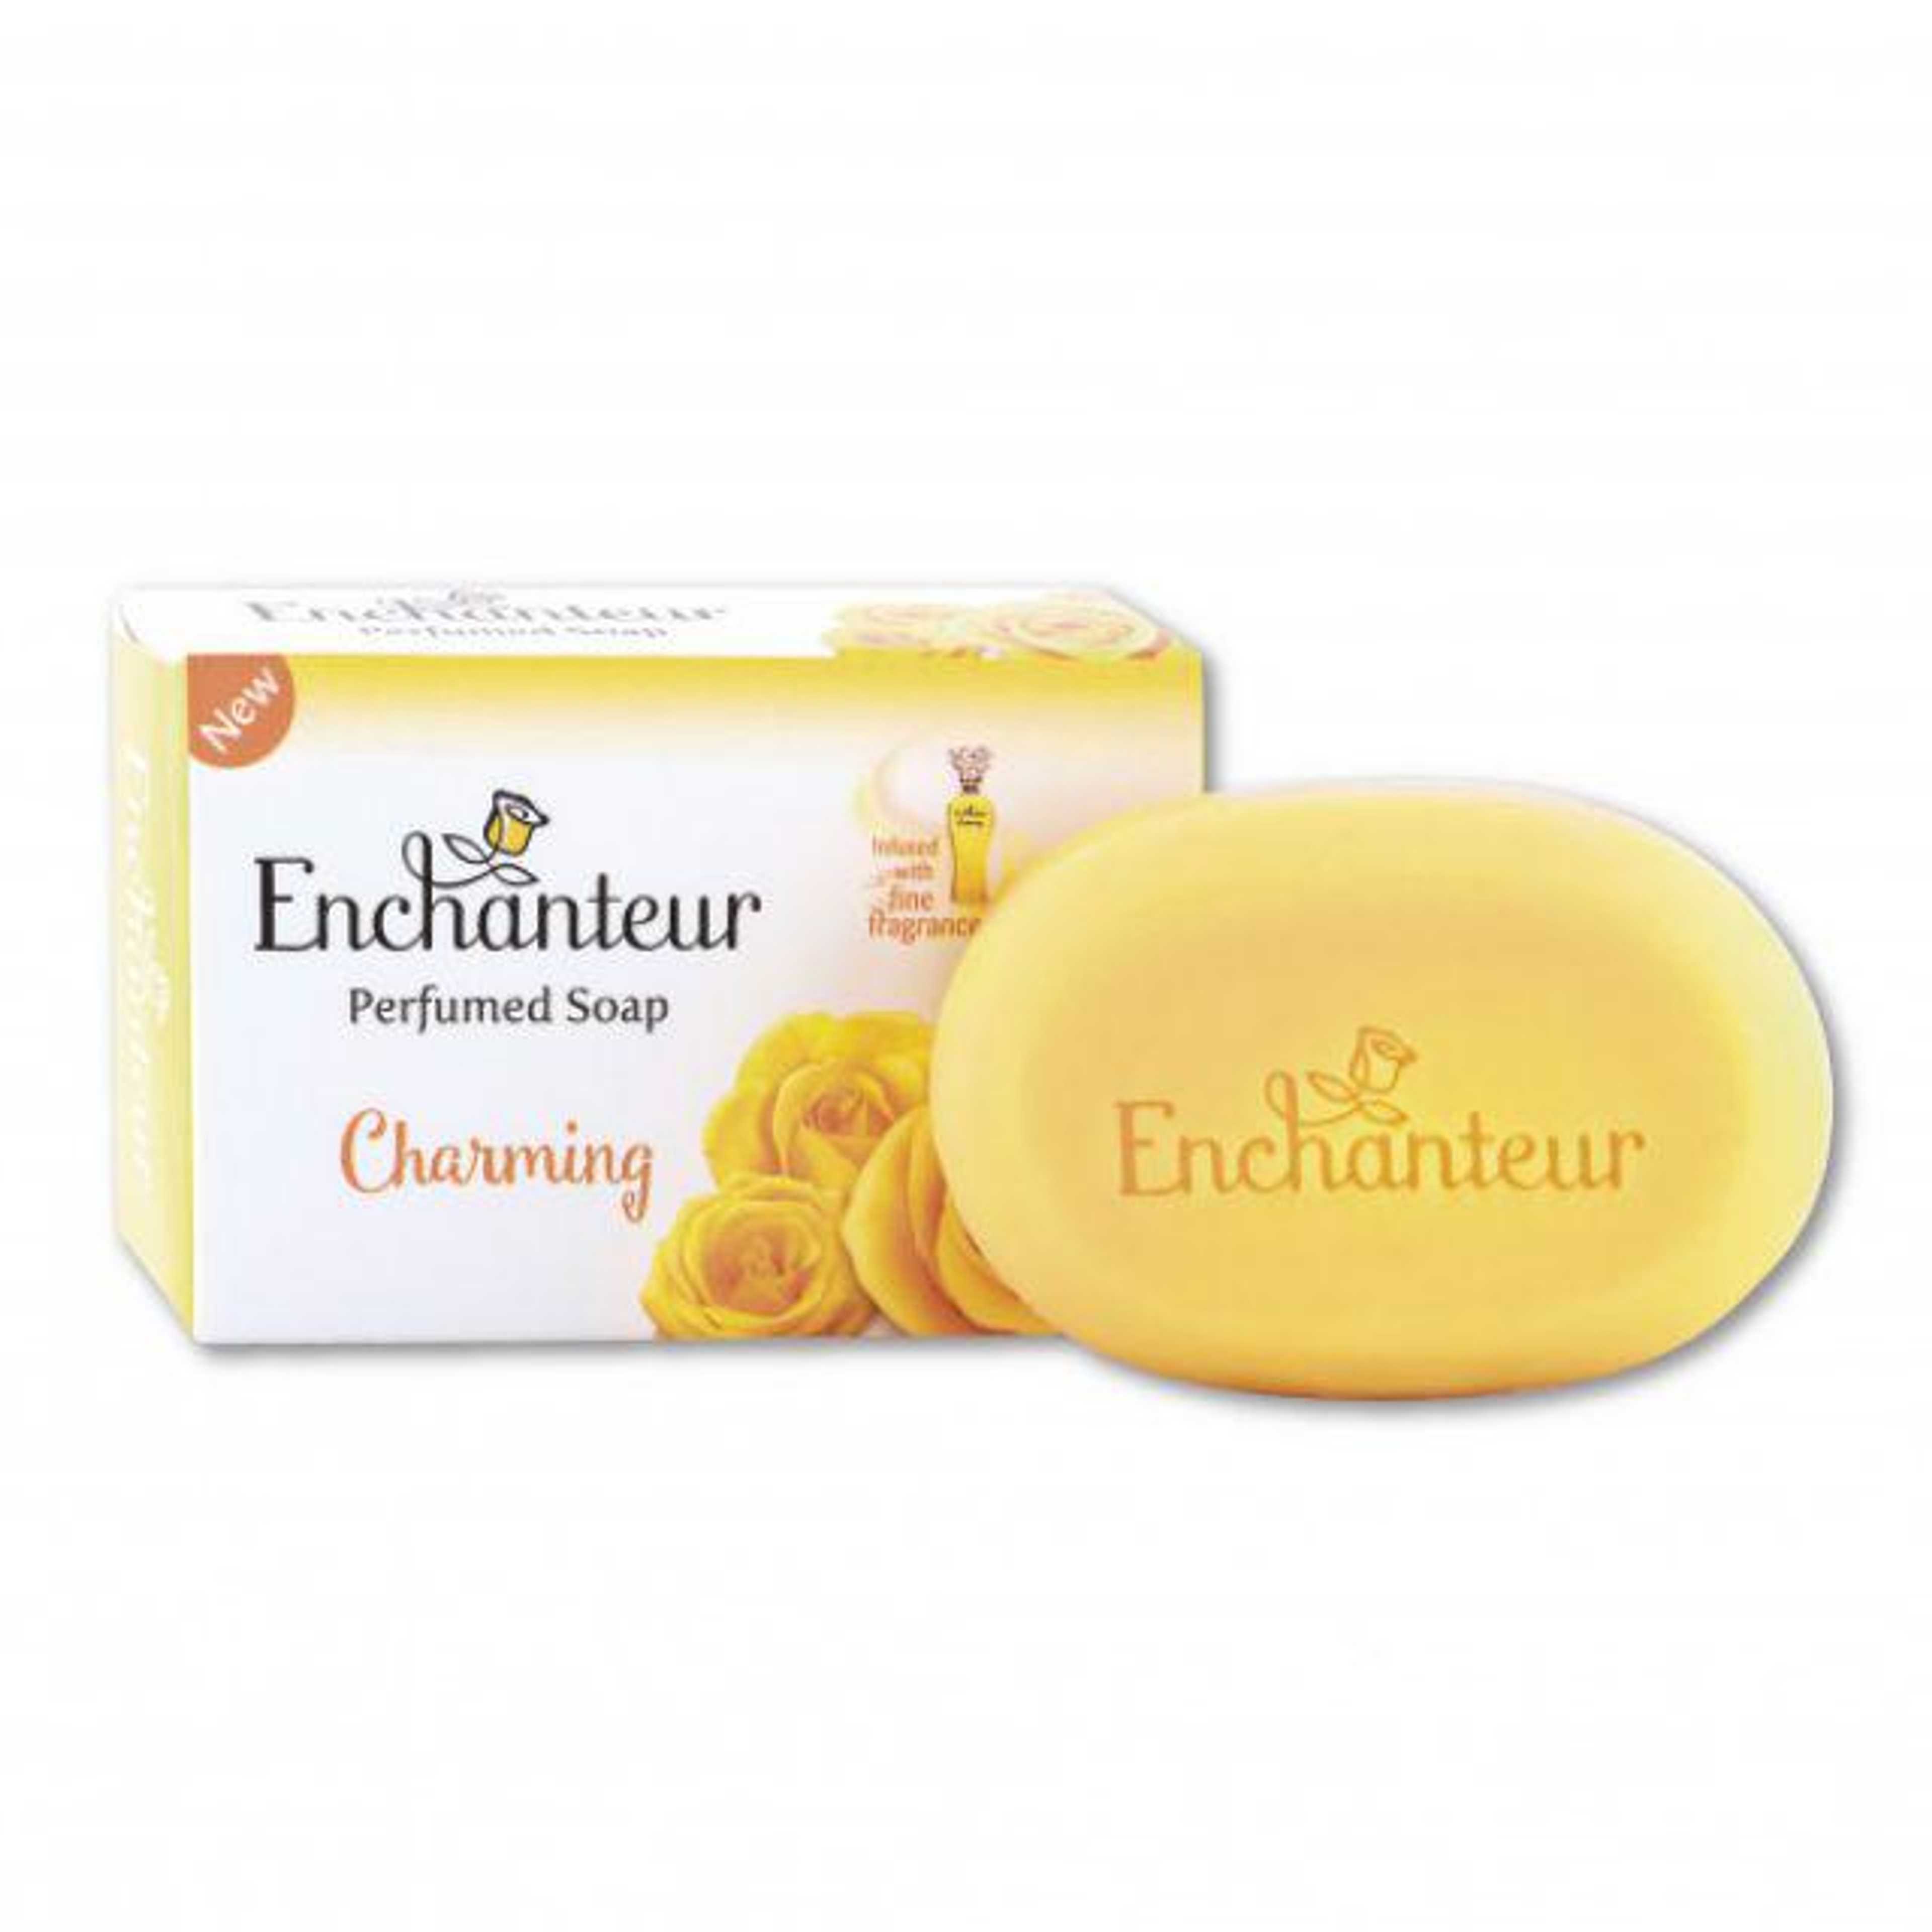 ENCHAN_TEUR DELUXE PERFUMED SOAP CHARMING 90G (Imported)